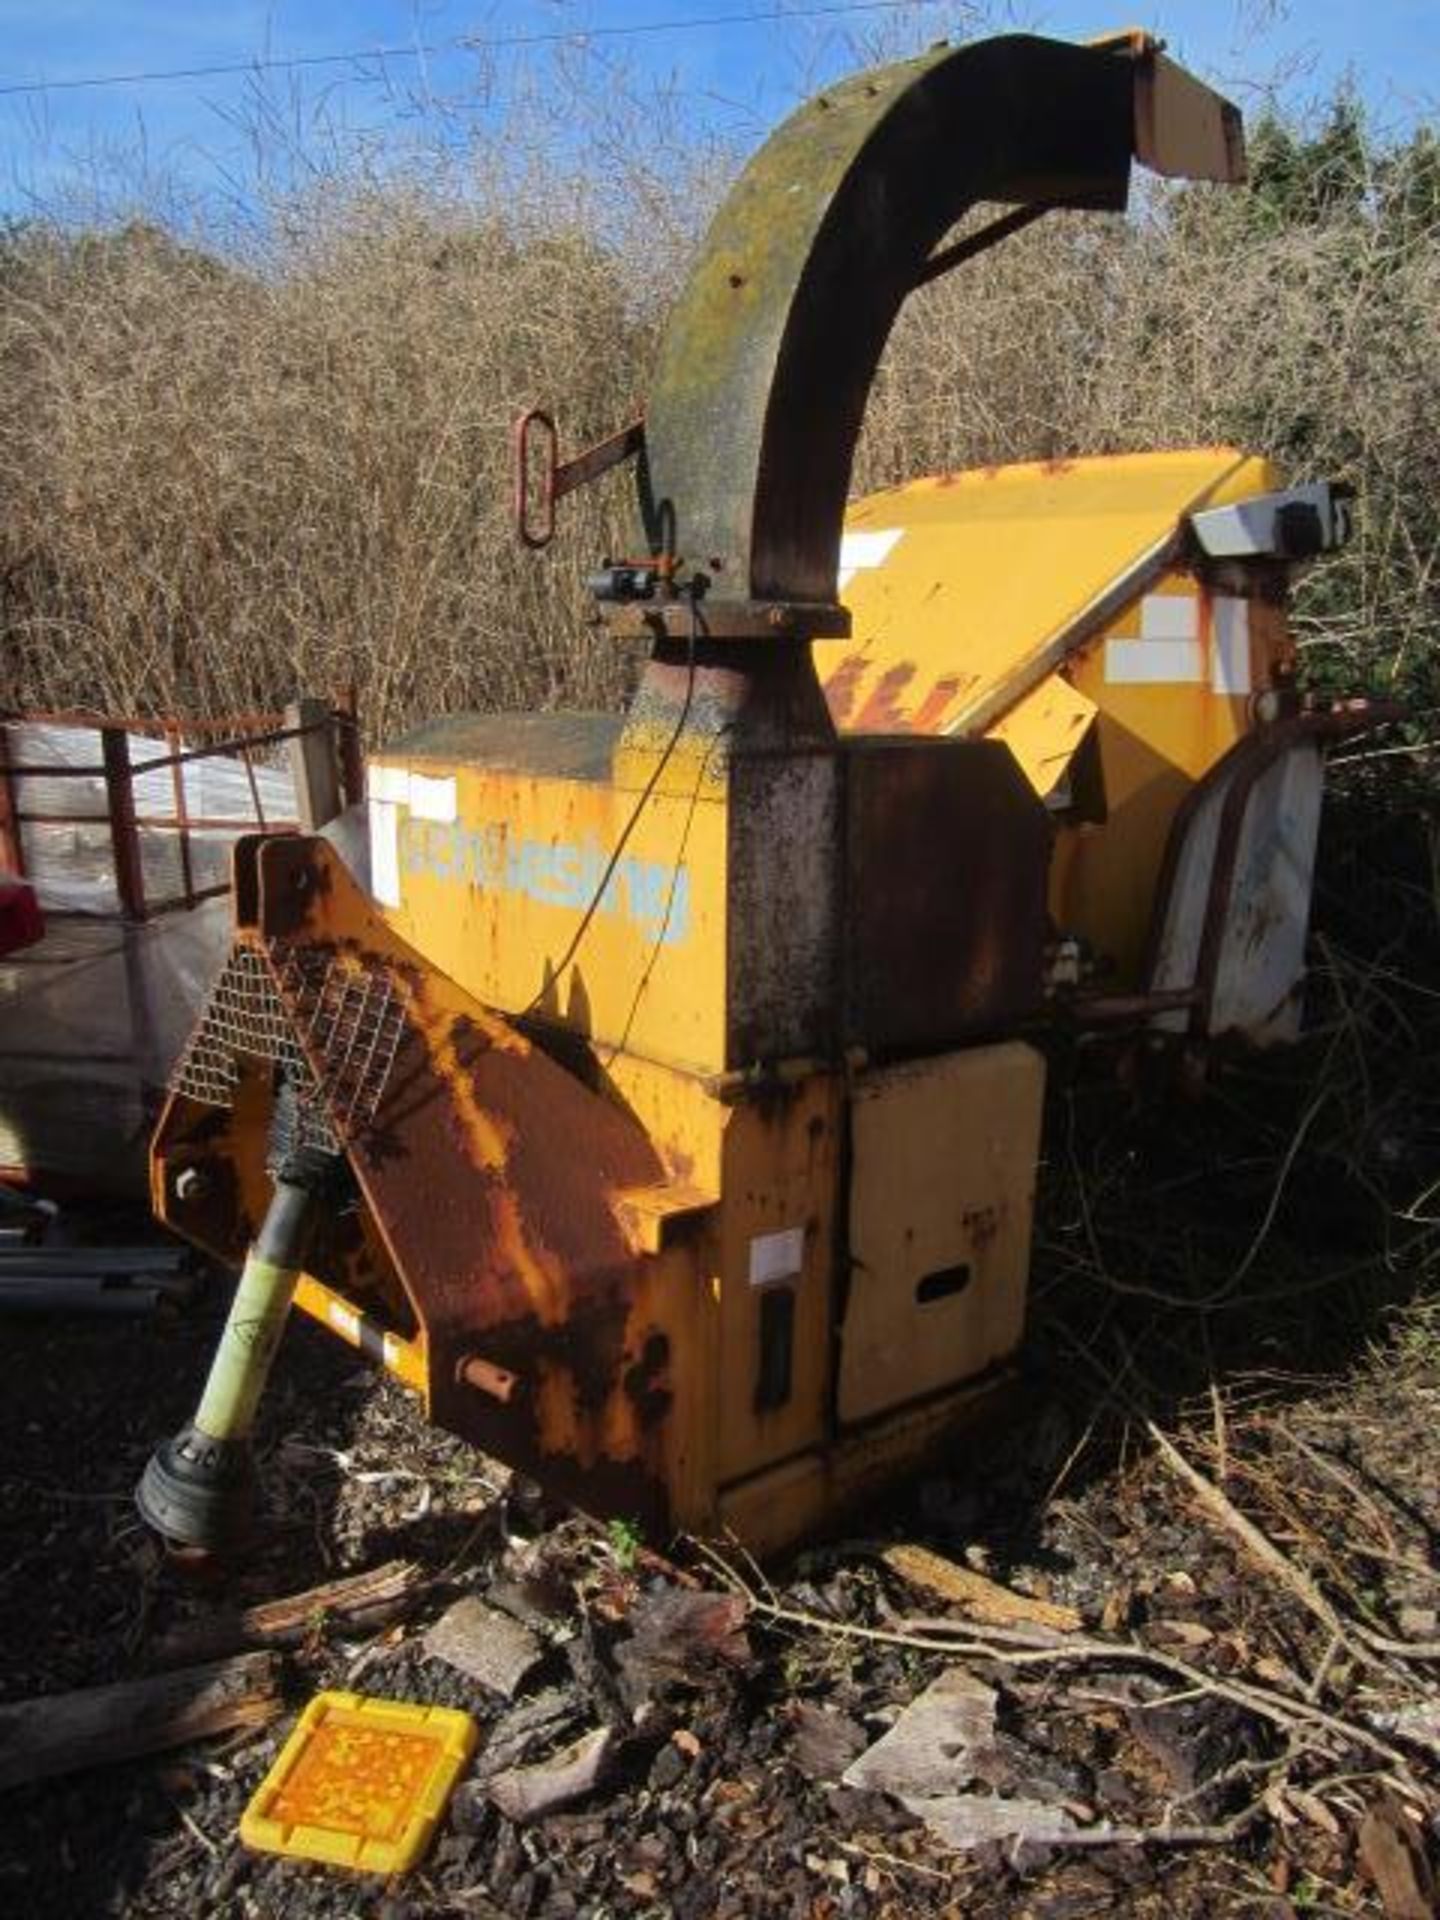 Schlesinger 3 point PTO chipper, model 330ZX, serial number 6938 (2001) - working condition unknown